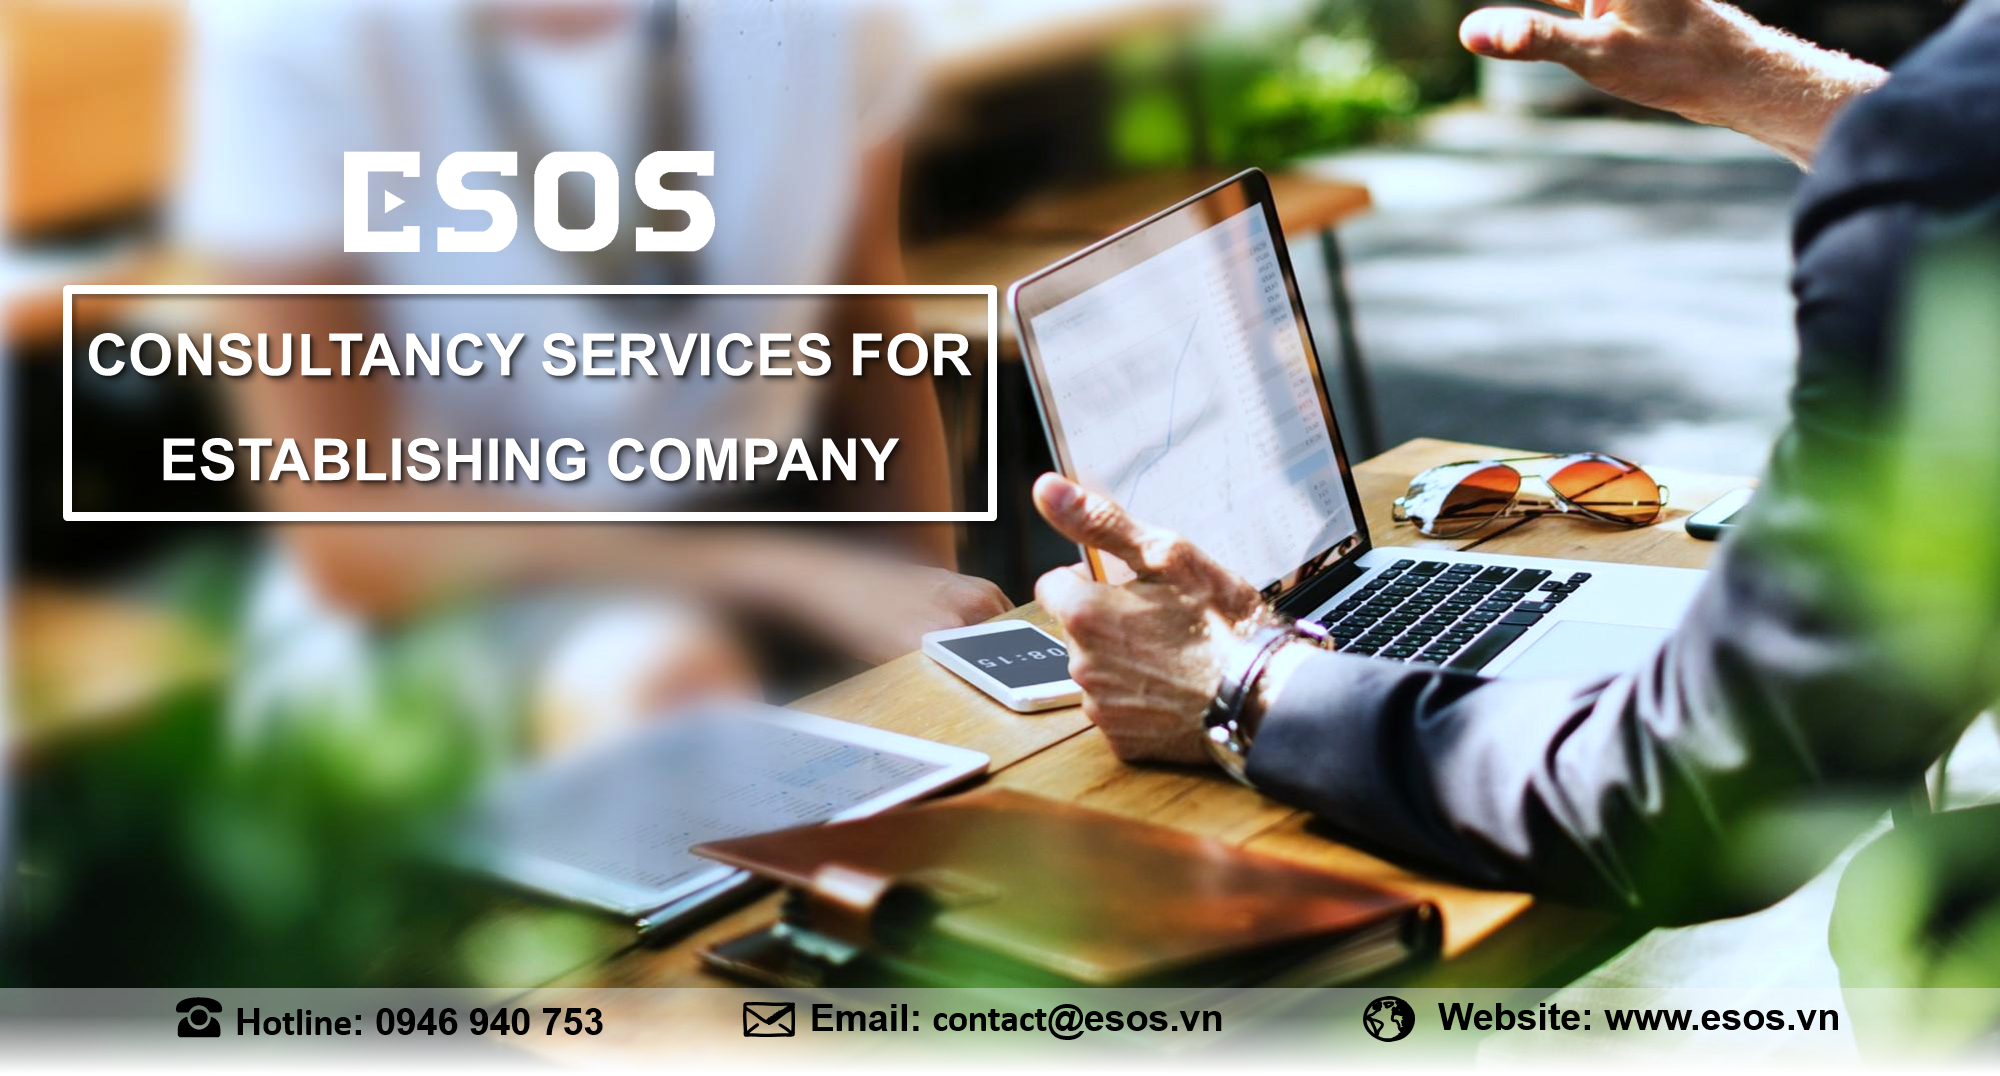 CONSULTANCY-SERVICES-FOR-ESTABLISHING-COMPANY-2019